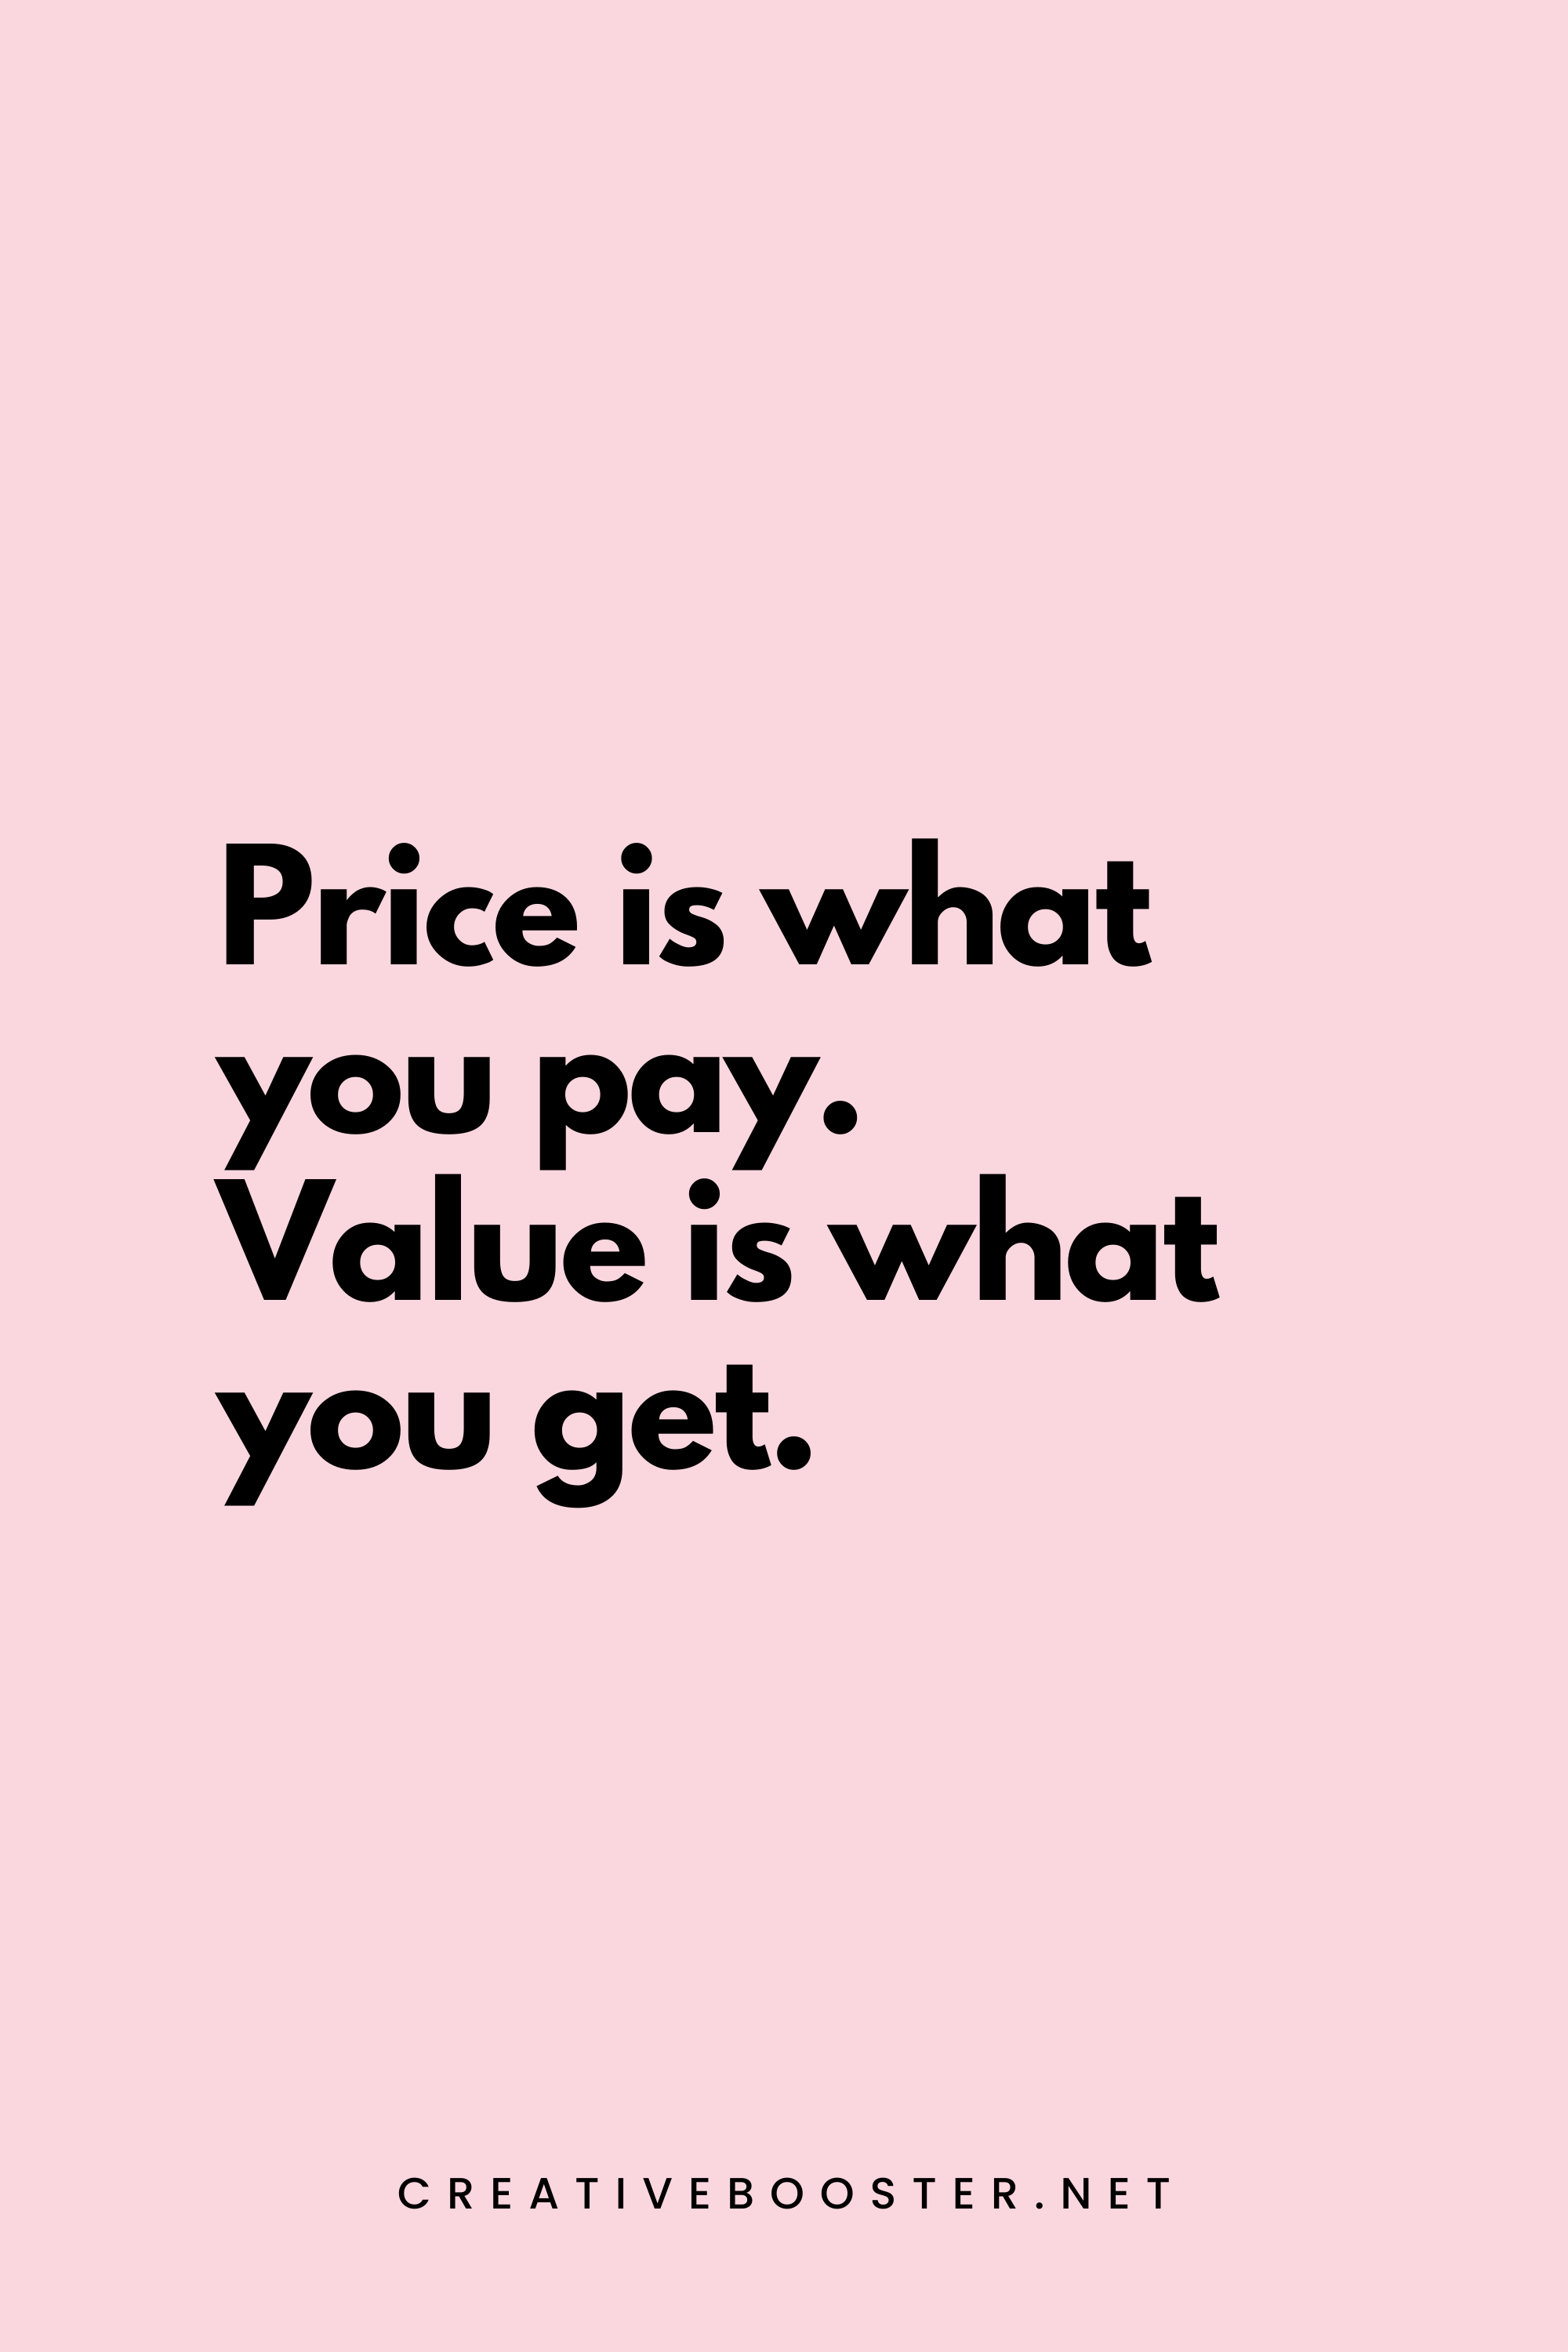 74. Price is what you pay. Value is what you get. - Warren Buffett - 8. Financial Freedom Quotes by Warren Buffett